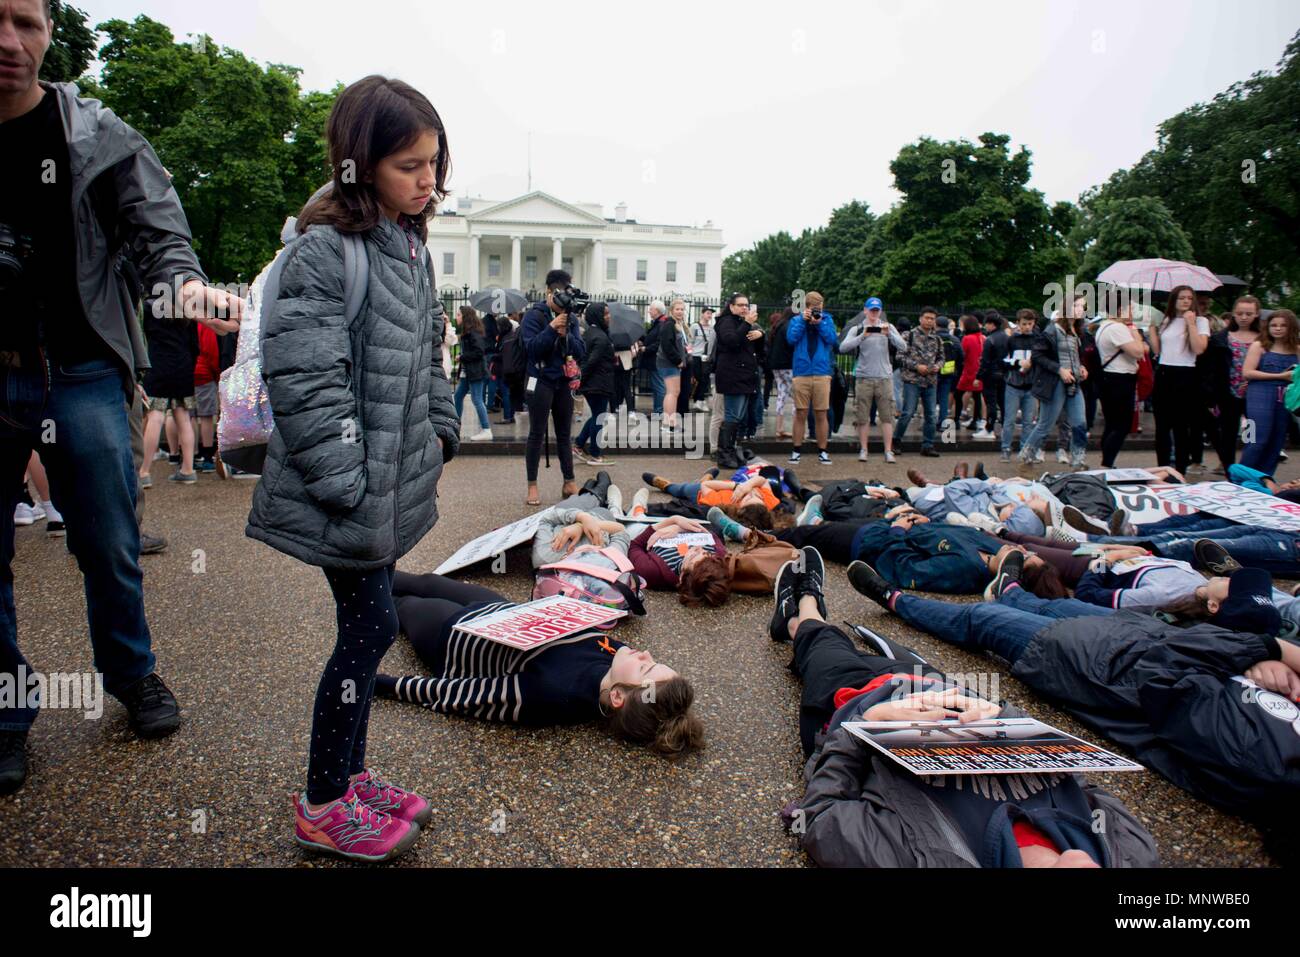 Washington, District of Columbia, USA. 19th May, 2018. A young tourist observes a ''lie-in'' staged by local high school students in front of the White House. The students demonstrated to honor the victims of the Santa Fe High School shooting in Texas and to demand the U.S. president and Congress work to pass gun control legislation. Credit: Erin Scott/ZUMA Wire/Alamy Live News Stock Photo